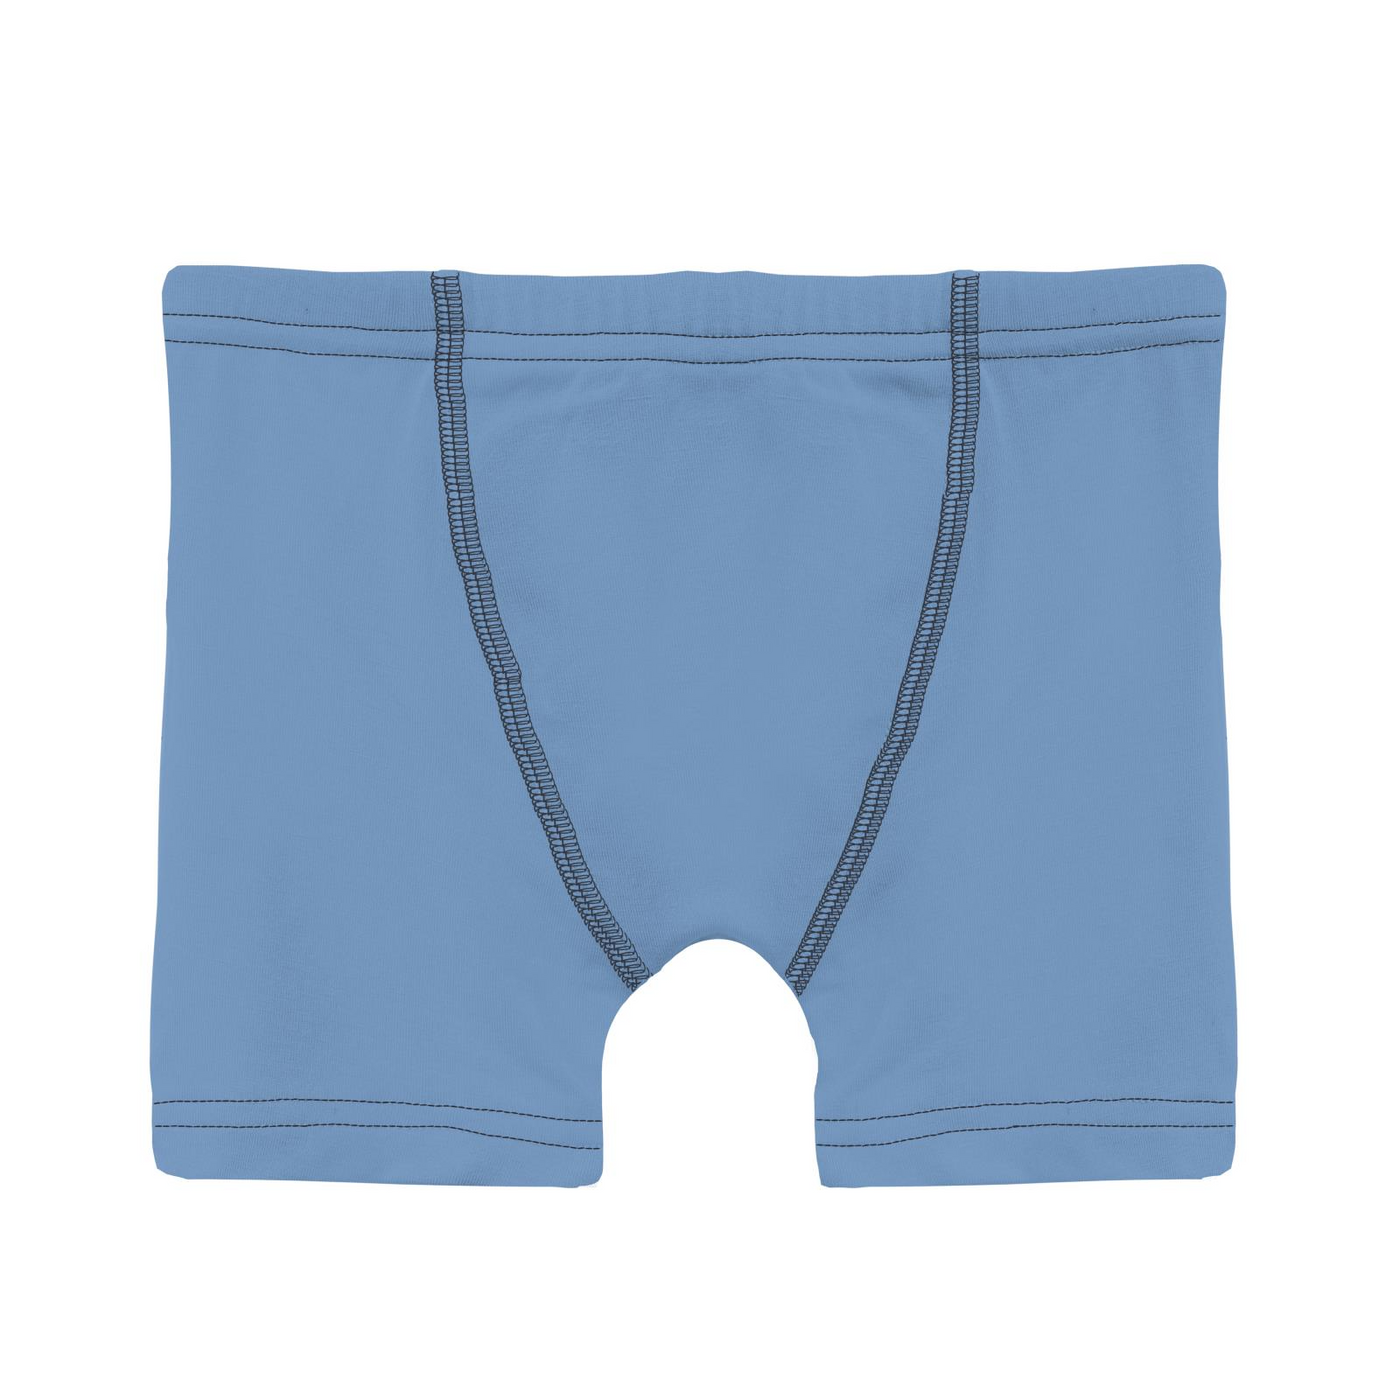 Kickee Pants Boxer Brief: Dream Blue with Deep Space